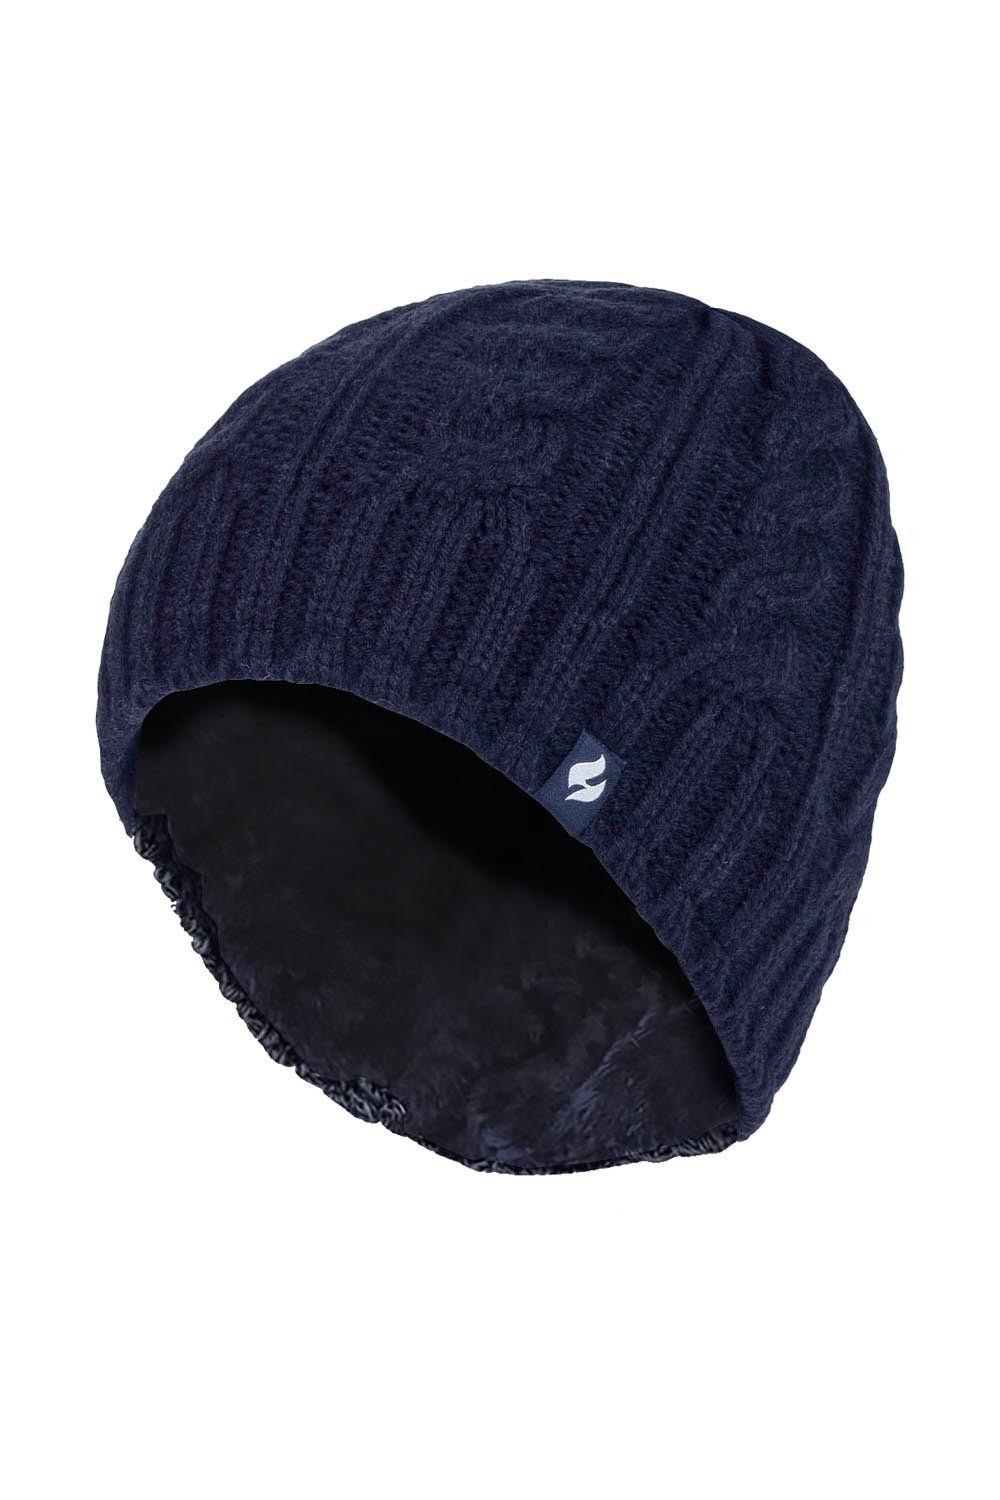 Womens Thermal Cable Knit Winter Hat -